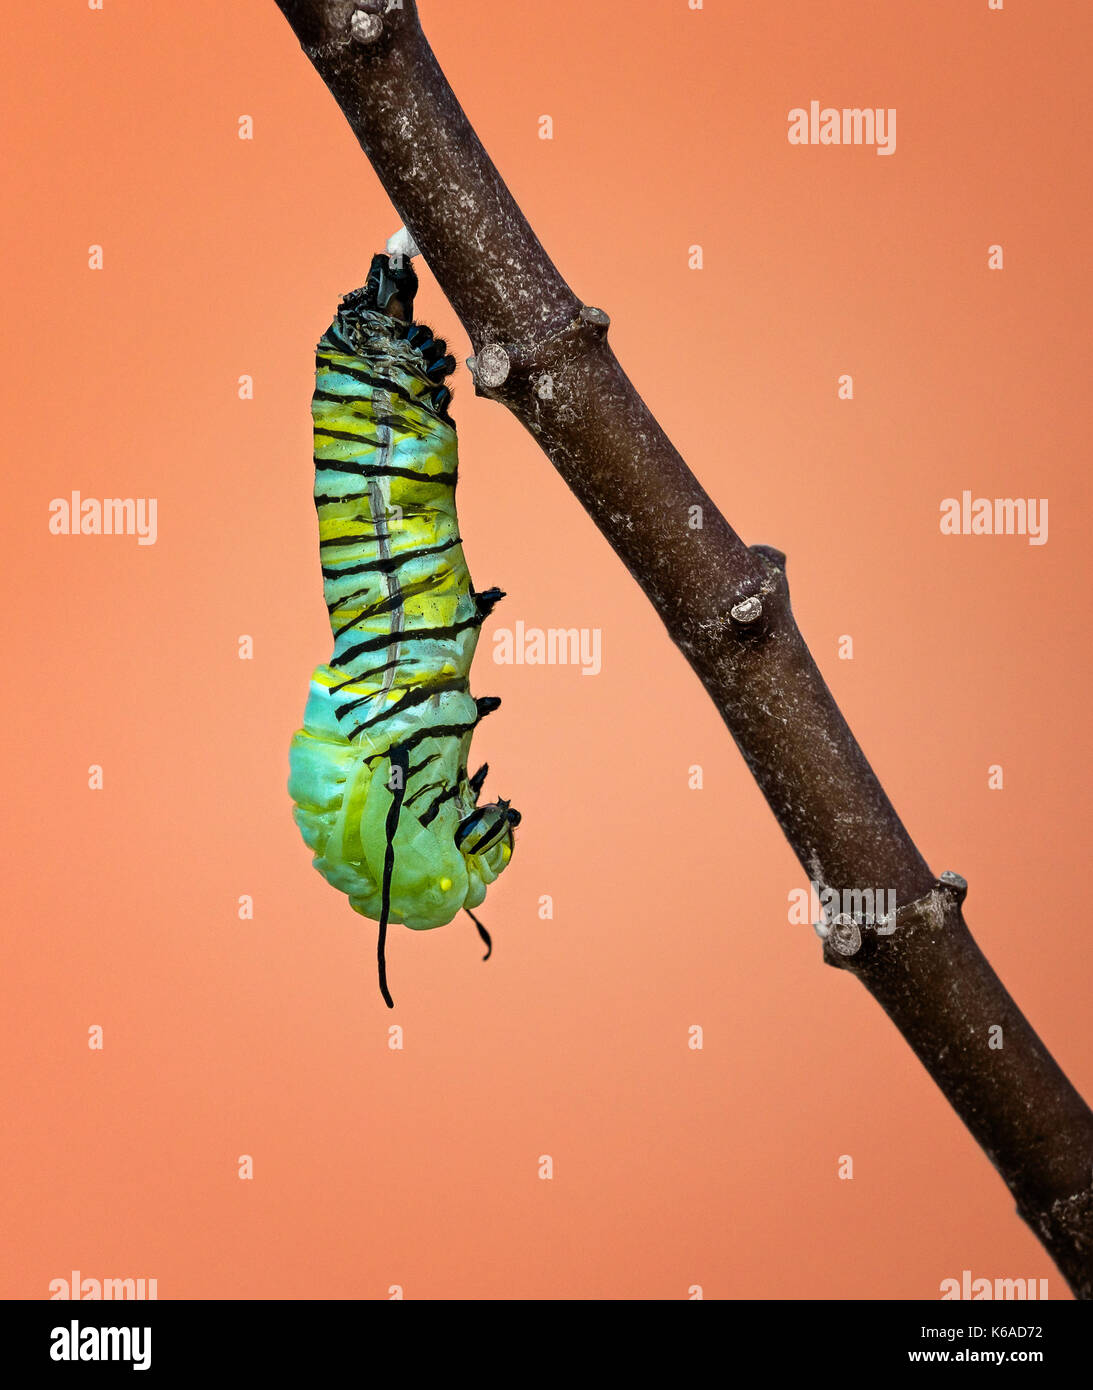 A Monarch caterpillar shedding its skin and pupating as it starts to form its chrysalis on a milkweed branch Stock Photo